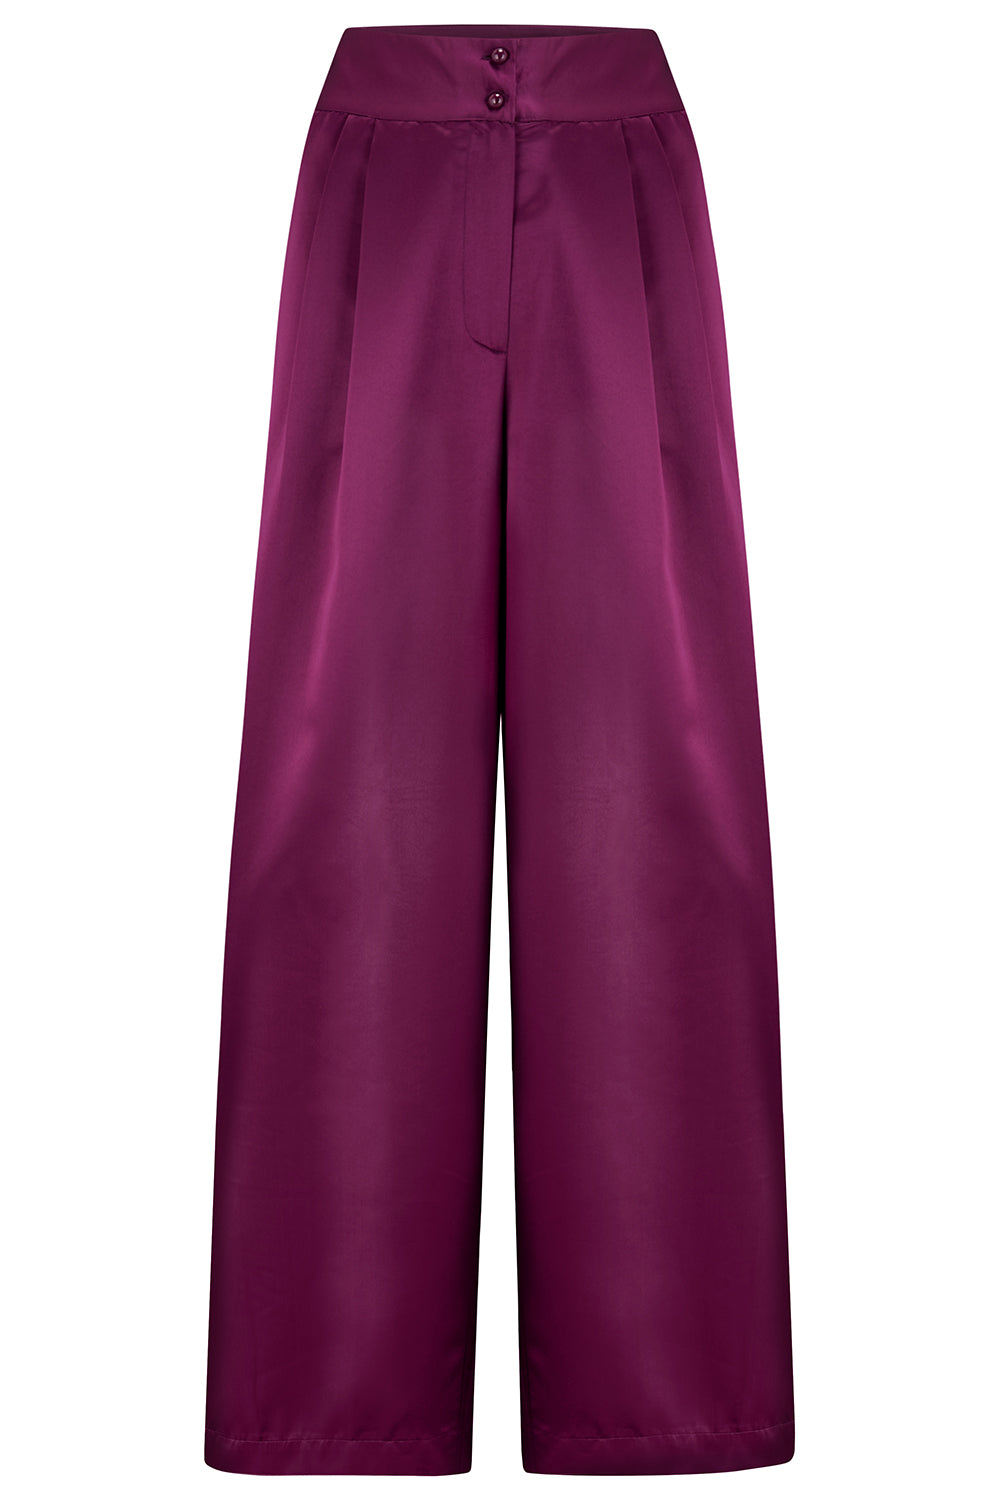 RnR "Luxe" Range.. The "Sophia" Palazzo Wide Leg Trousers in Super Luxurious Rich Plum SATIN